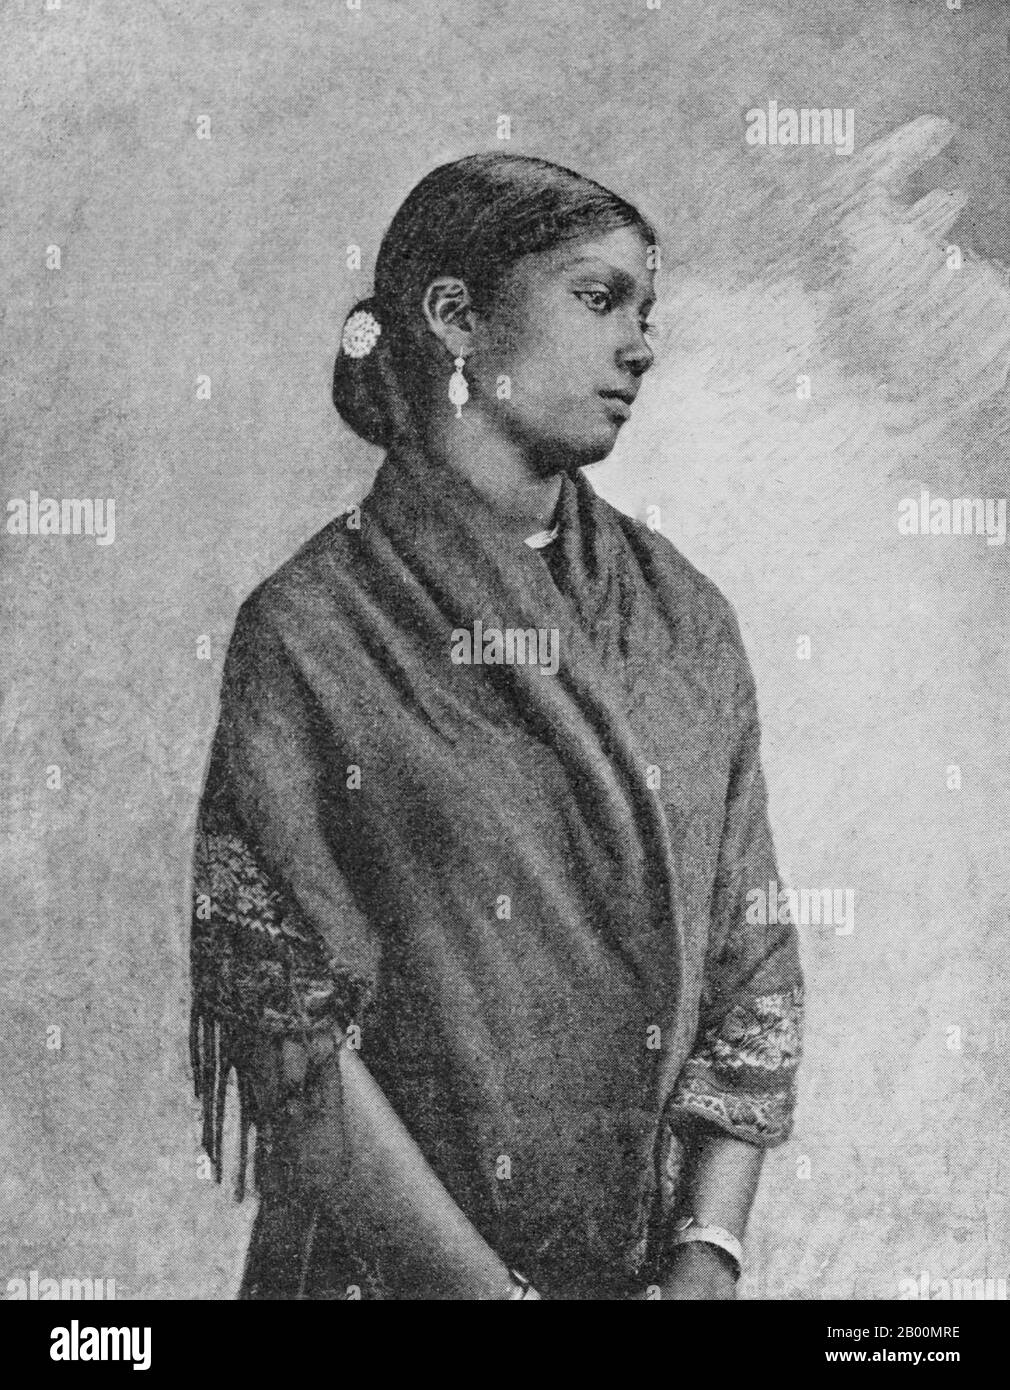 Sri Lanka: Portrait of a Sinhalese girl, late 19th century.  The Sinhalese are an ethnic group forming the majority in Sri Lanka, constituting 74% of the Sri Lankan population. They number approximately 15 million in the world. They live mainly in central, south and west Sri Lanka. According to legend they are the descendants of the exiled Prince Vijaya who arrived from North-East India to Sri Lanka in 543 BCE. The Sinhalese identity is based on language, heritage and religion. The vast majority of Sinhalese are Theravada Buddhists and speak Sinhala, Stock Photo